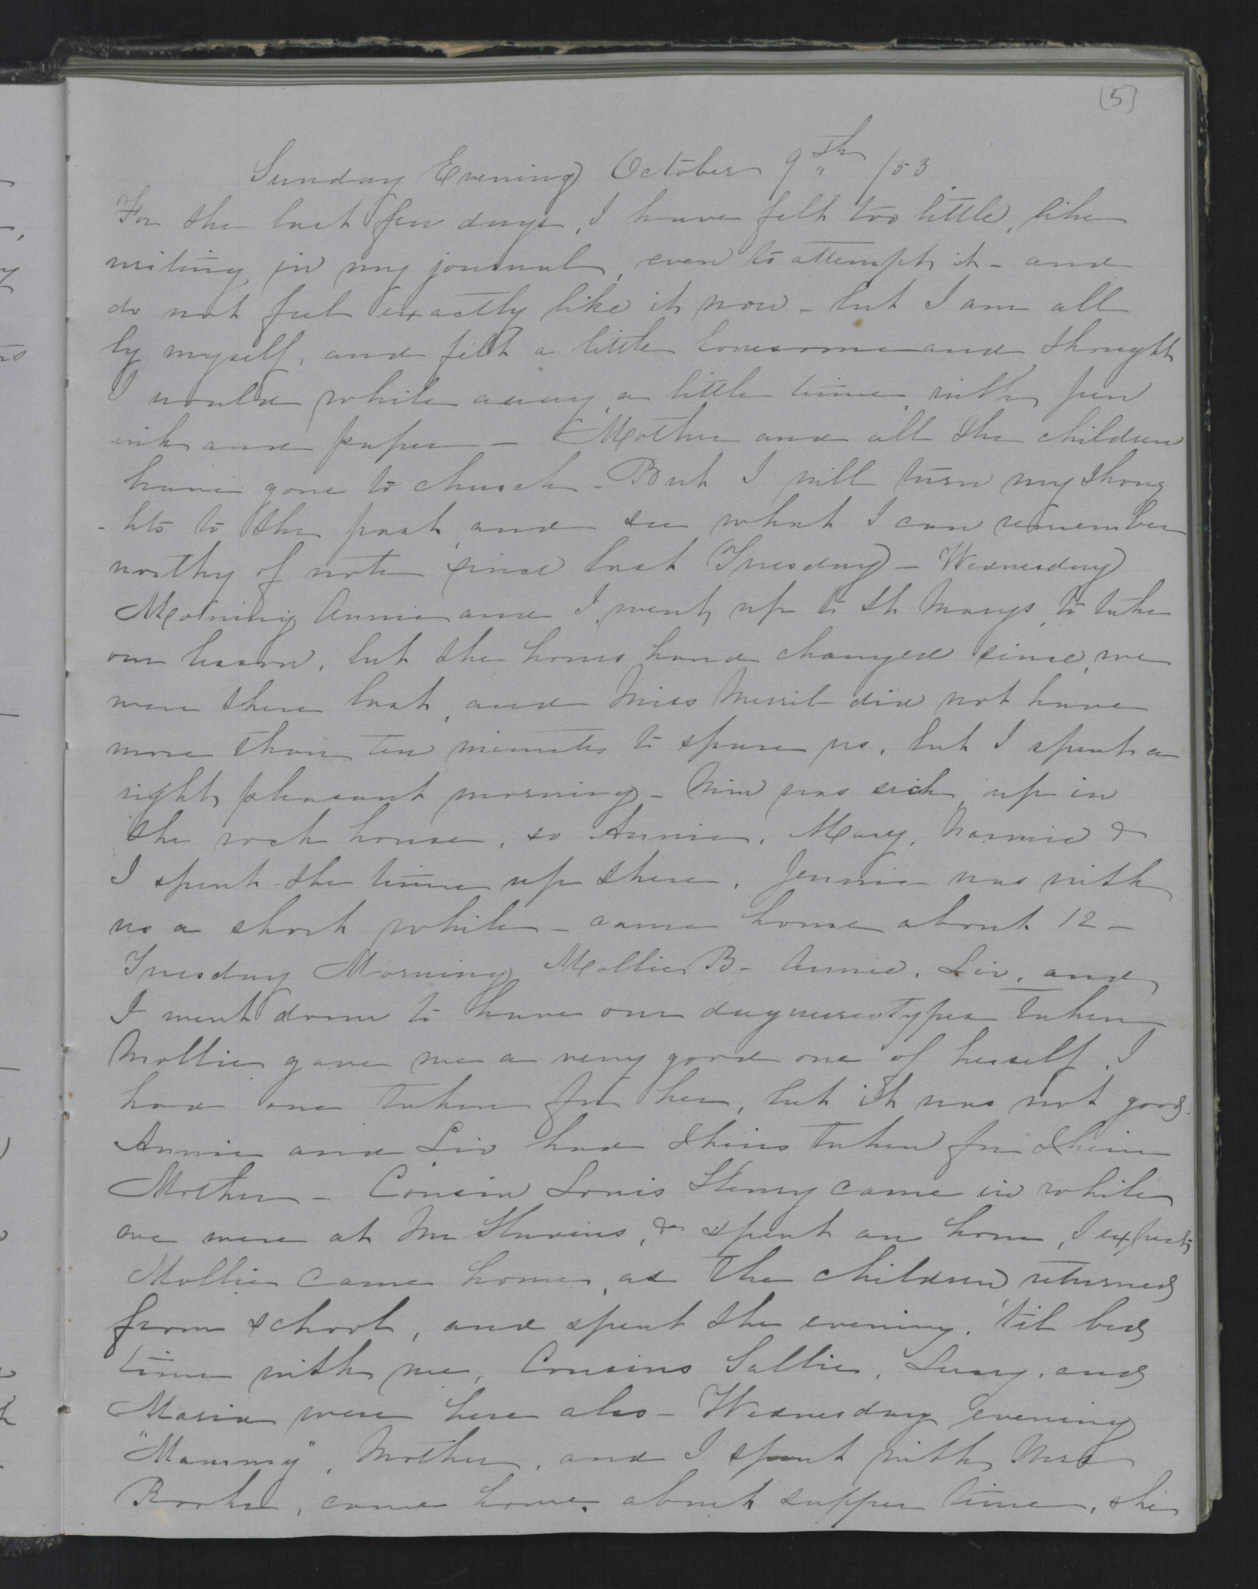 Diary Entry from Margaret Eliza Cotten, 9 October 1853, Page 1